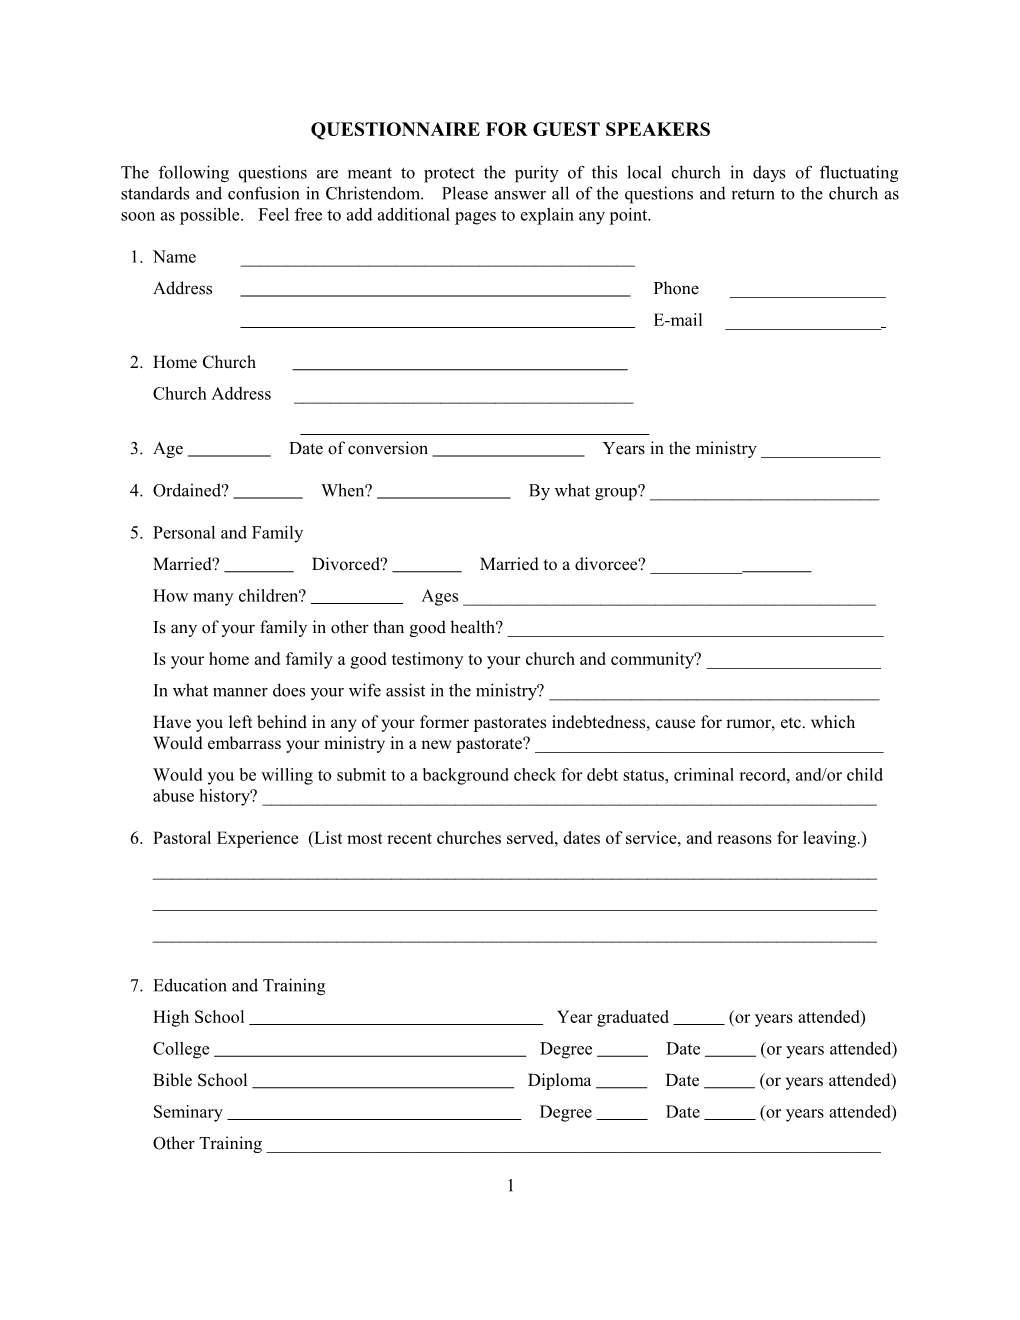 Questionnaire for Guest Speakers